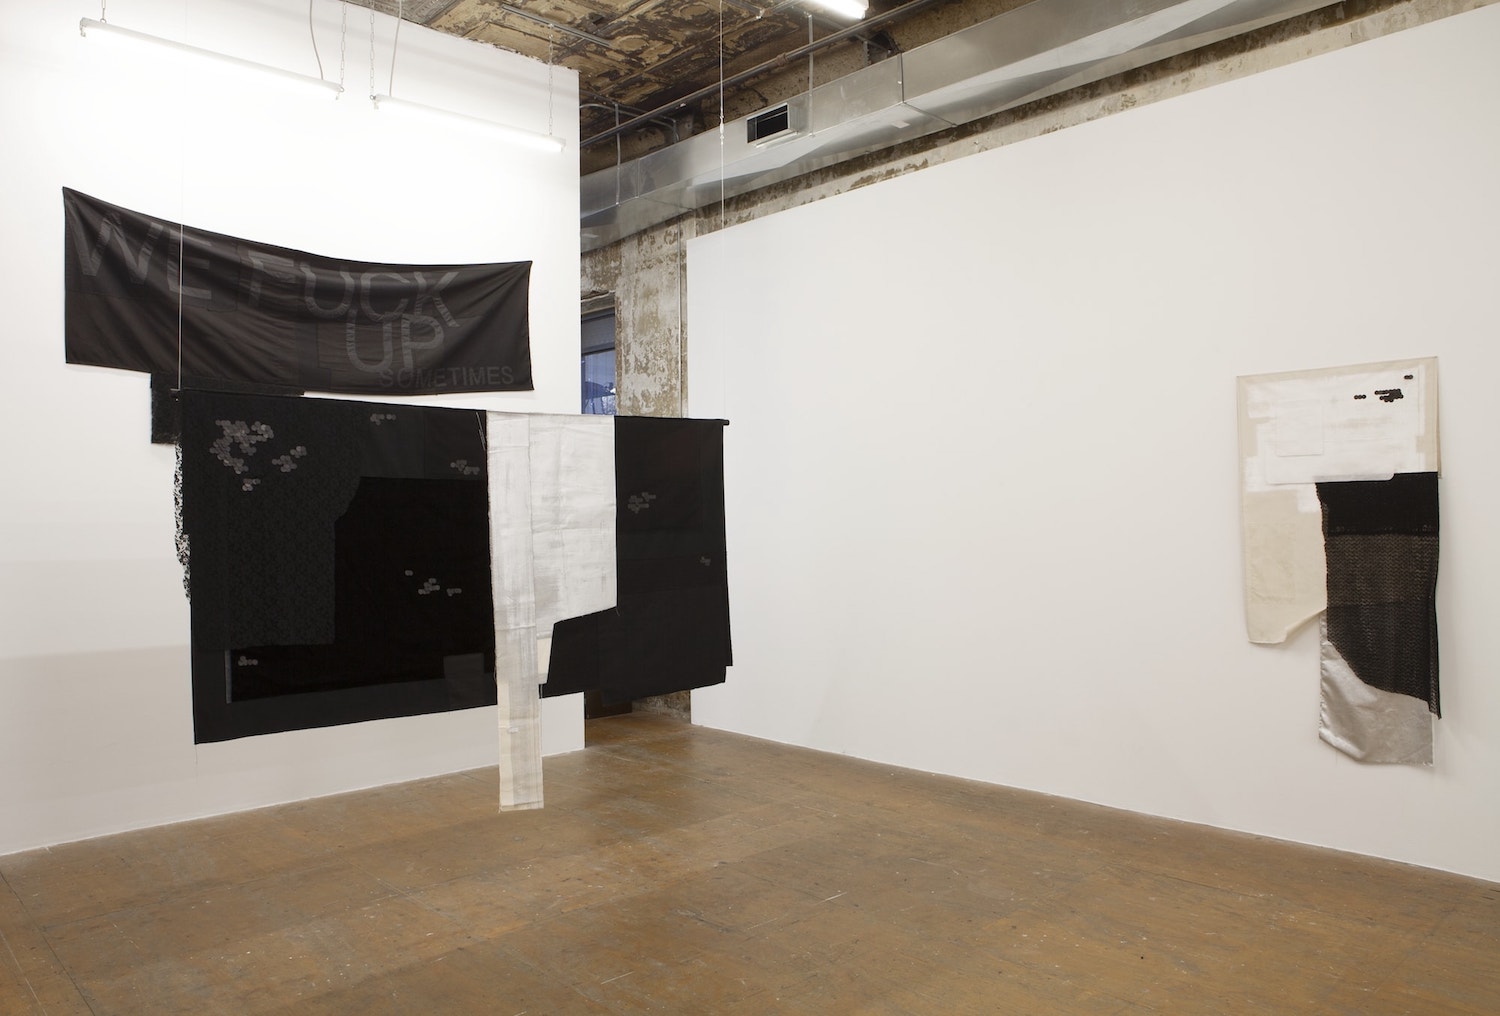 Tuesday Smillie, *Reflecting Light into The Unshadow*. Installation view